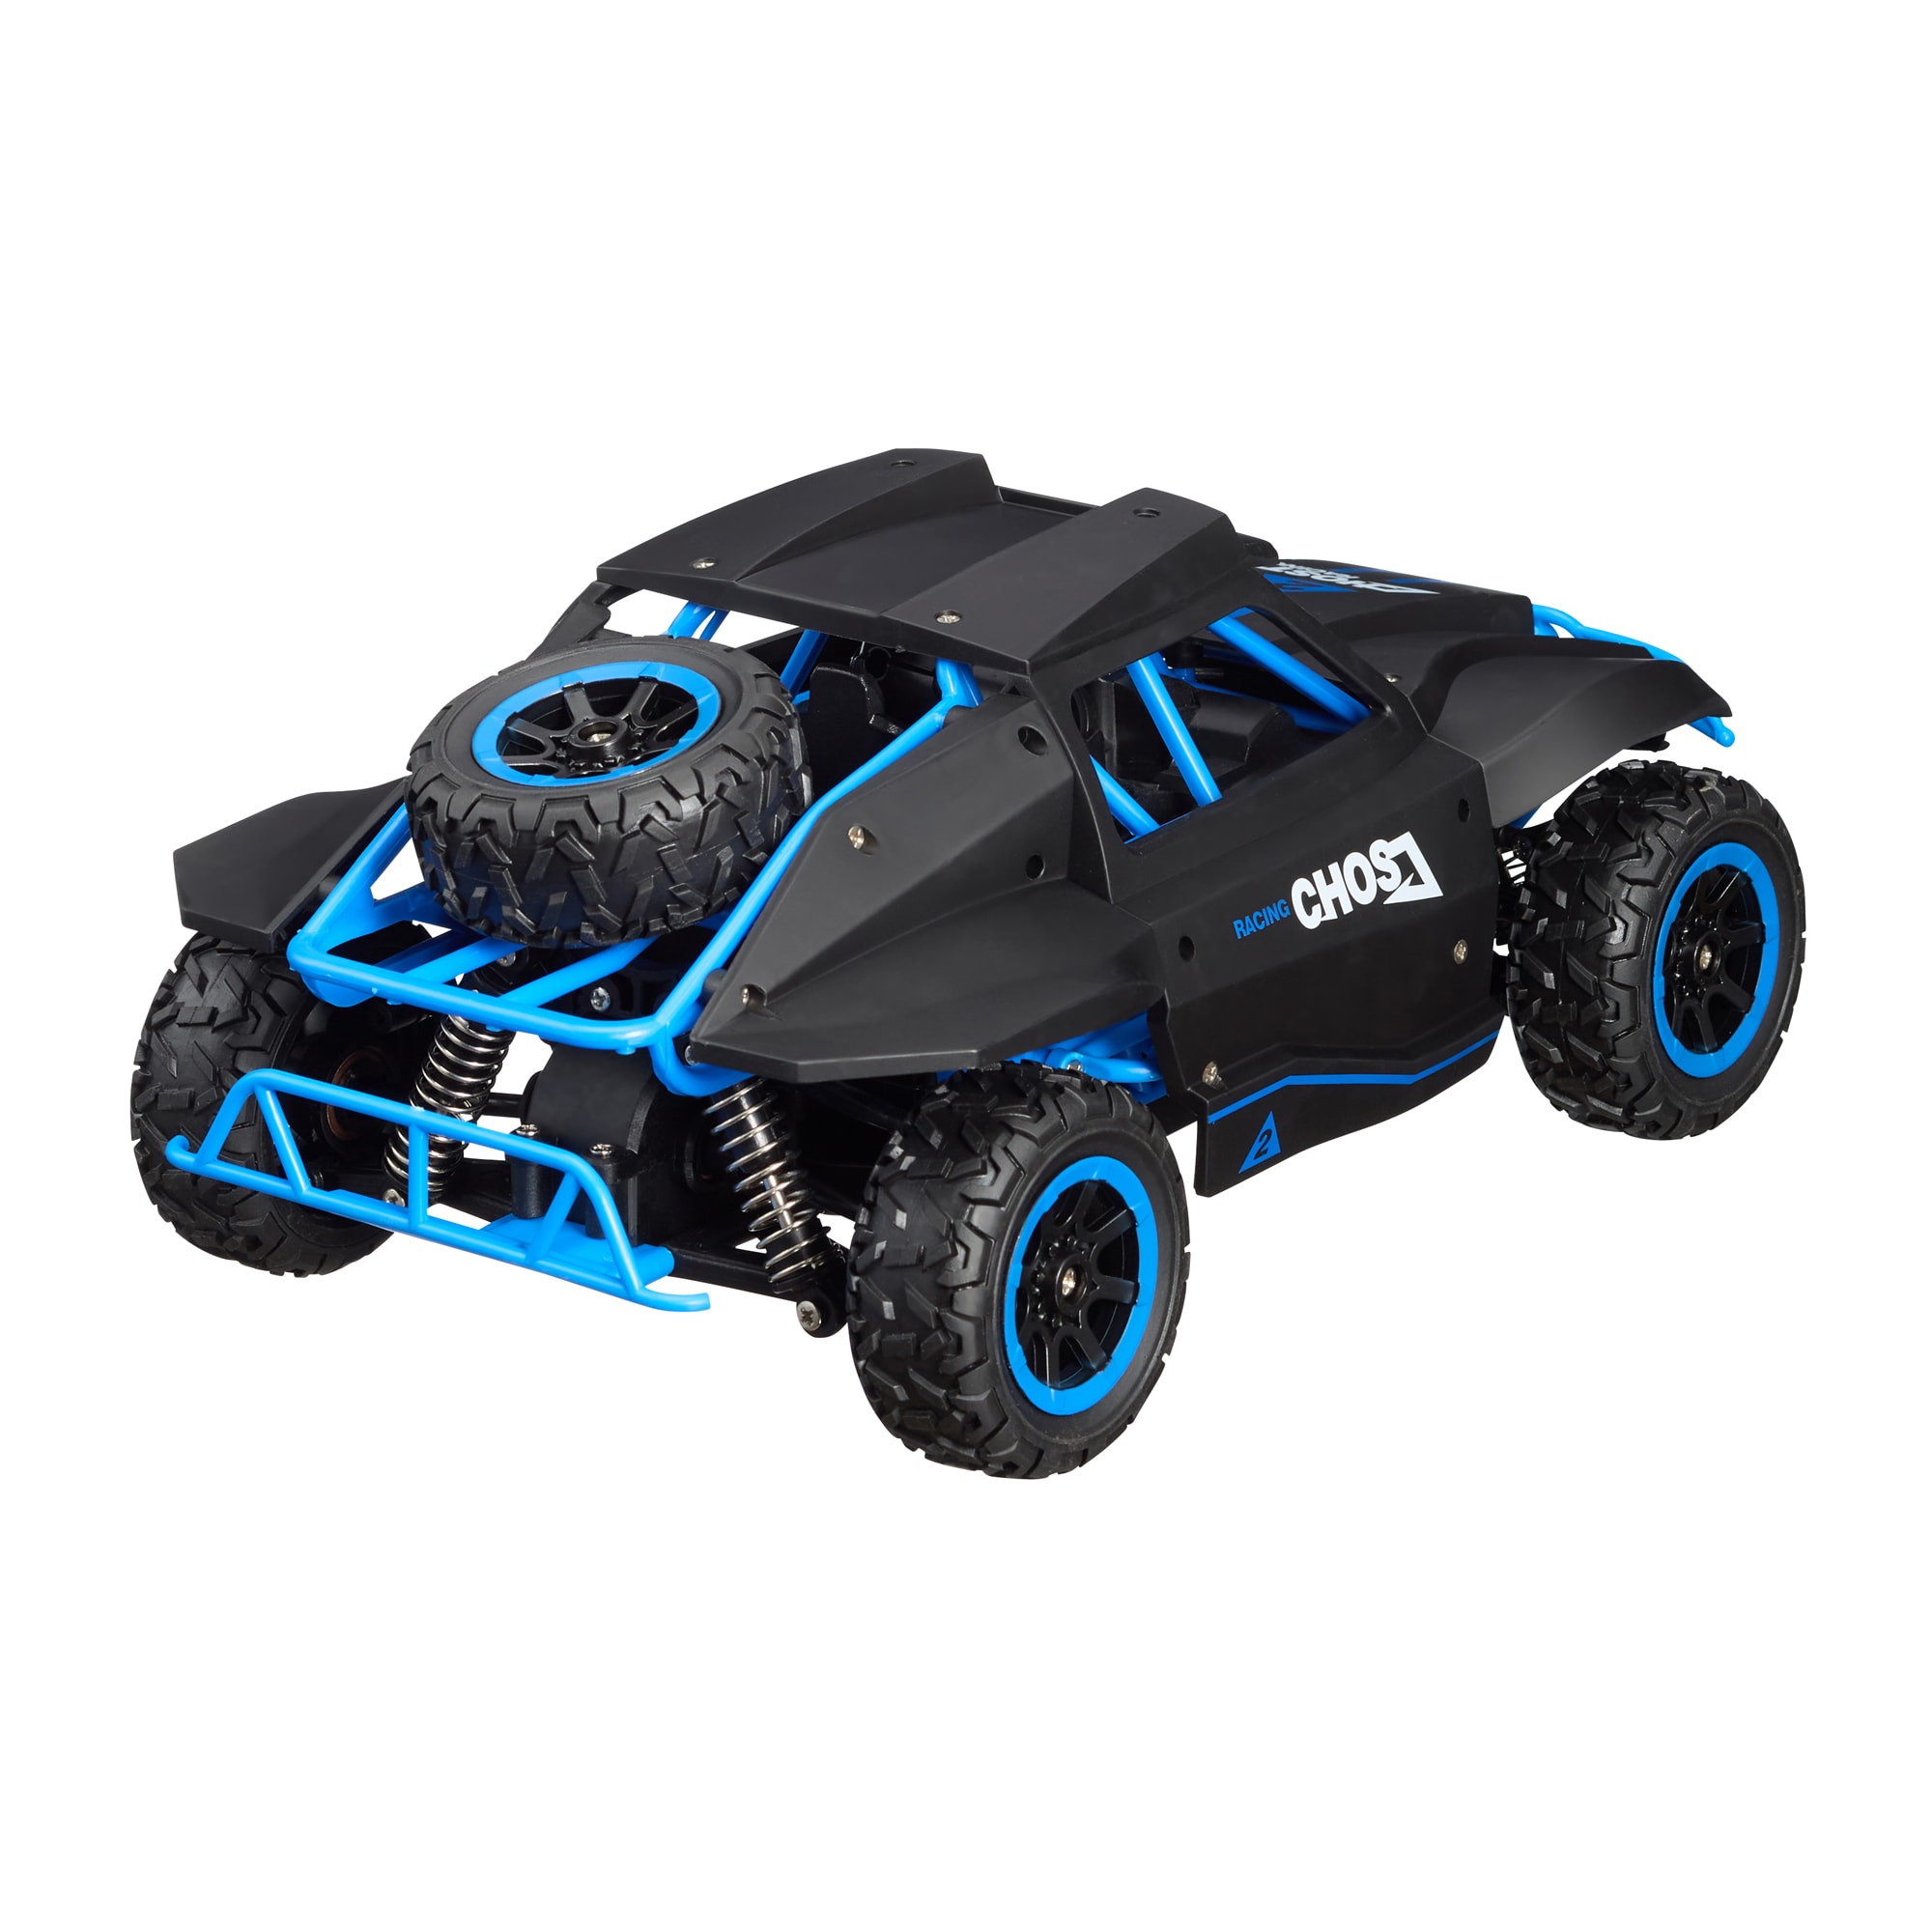 Sophie idioom kool Purchase the Amewi RC Ghost Dune Buggy 4WD RTR by ASMC